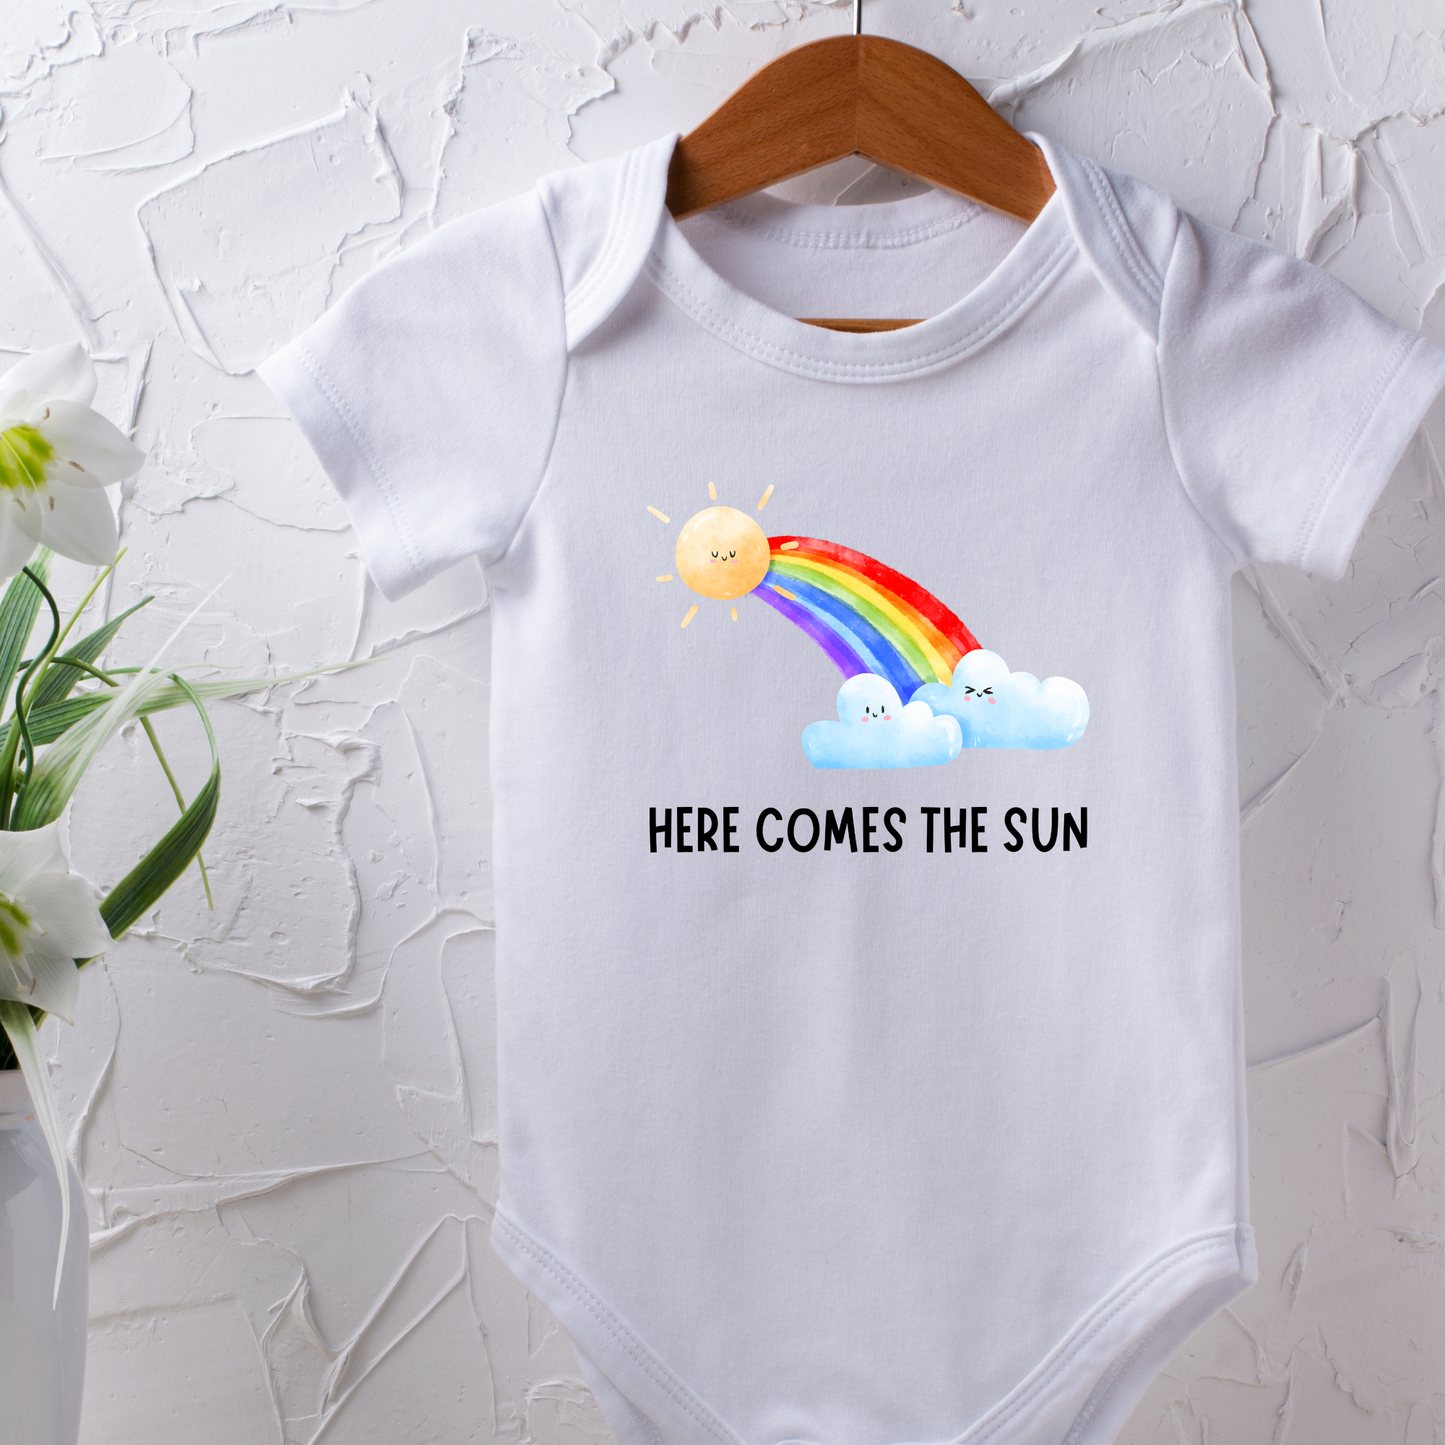  little me newborn and baby clothes, toddler clothing, funny shirt, funny baby outfit, newborn babies, personalized baby outfit, personalized onesie, baby bodysuit, pregnancy announcement, babyshower announcement, social media pregnancy announcement, miracle baby outfit